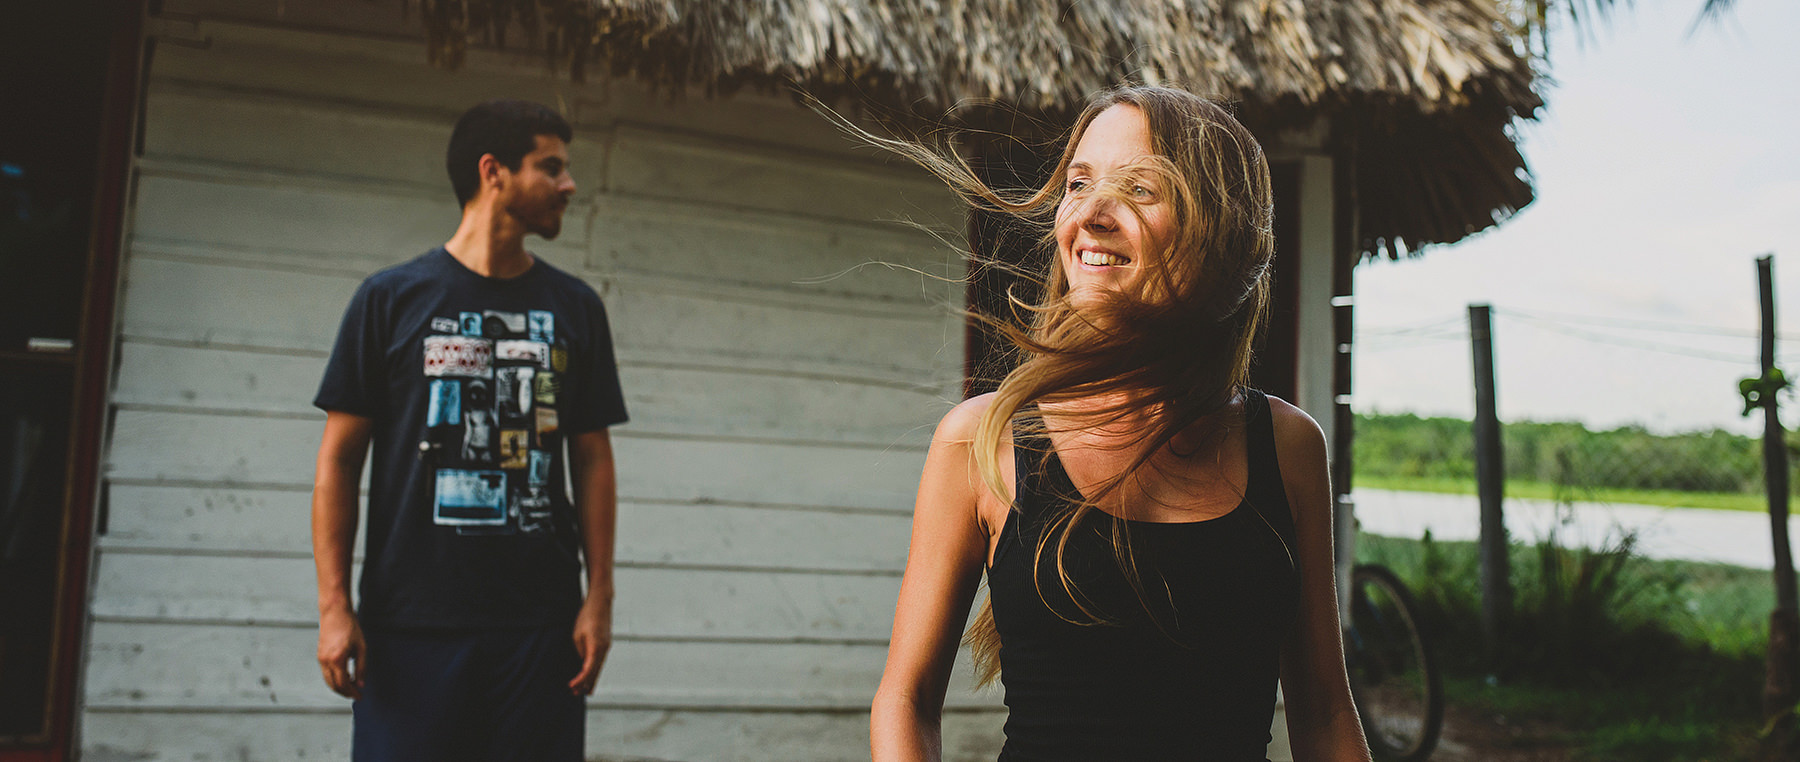 playful engagement session in holbox island